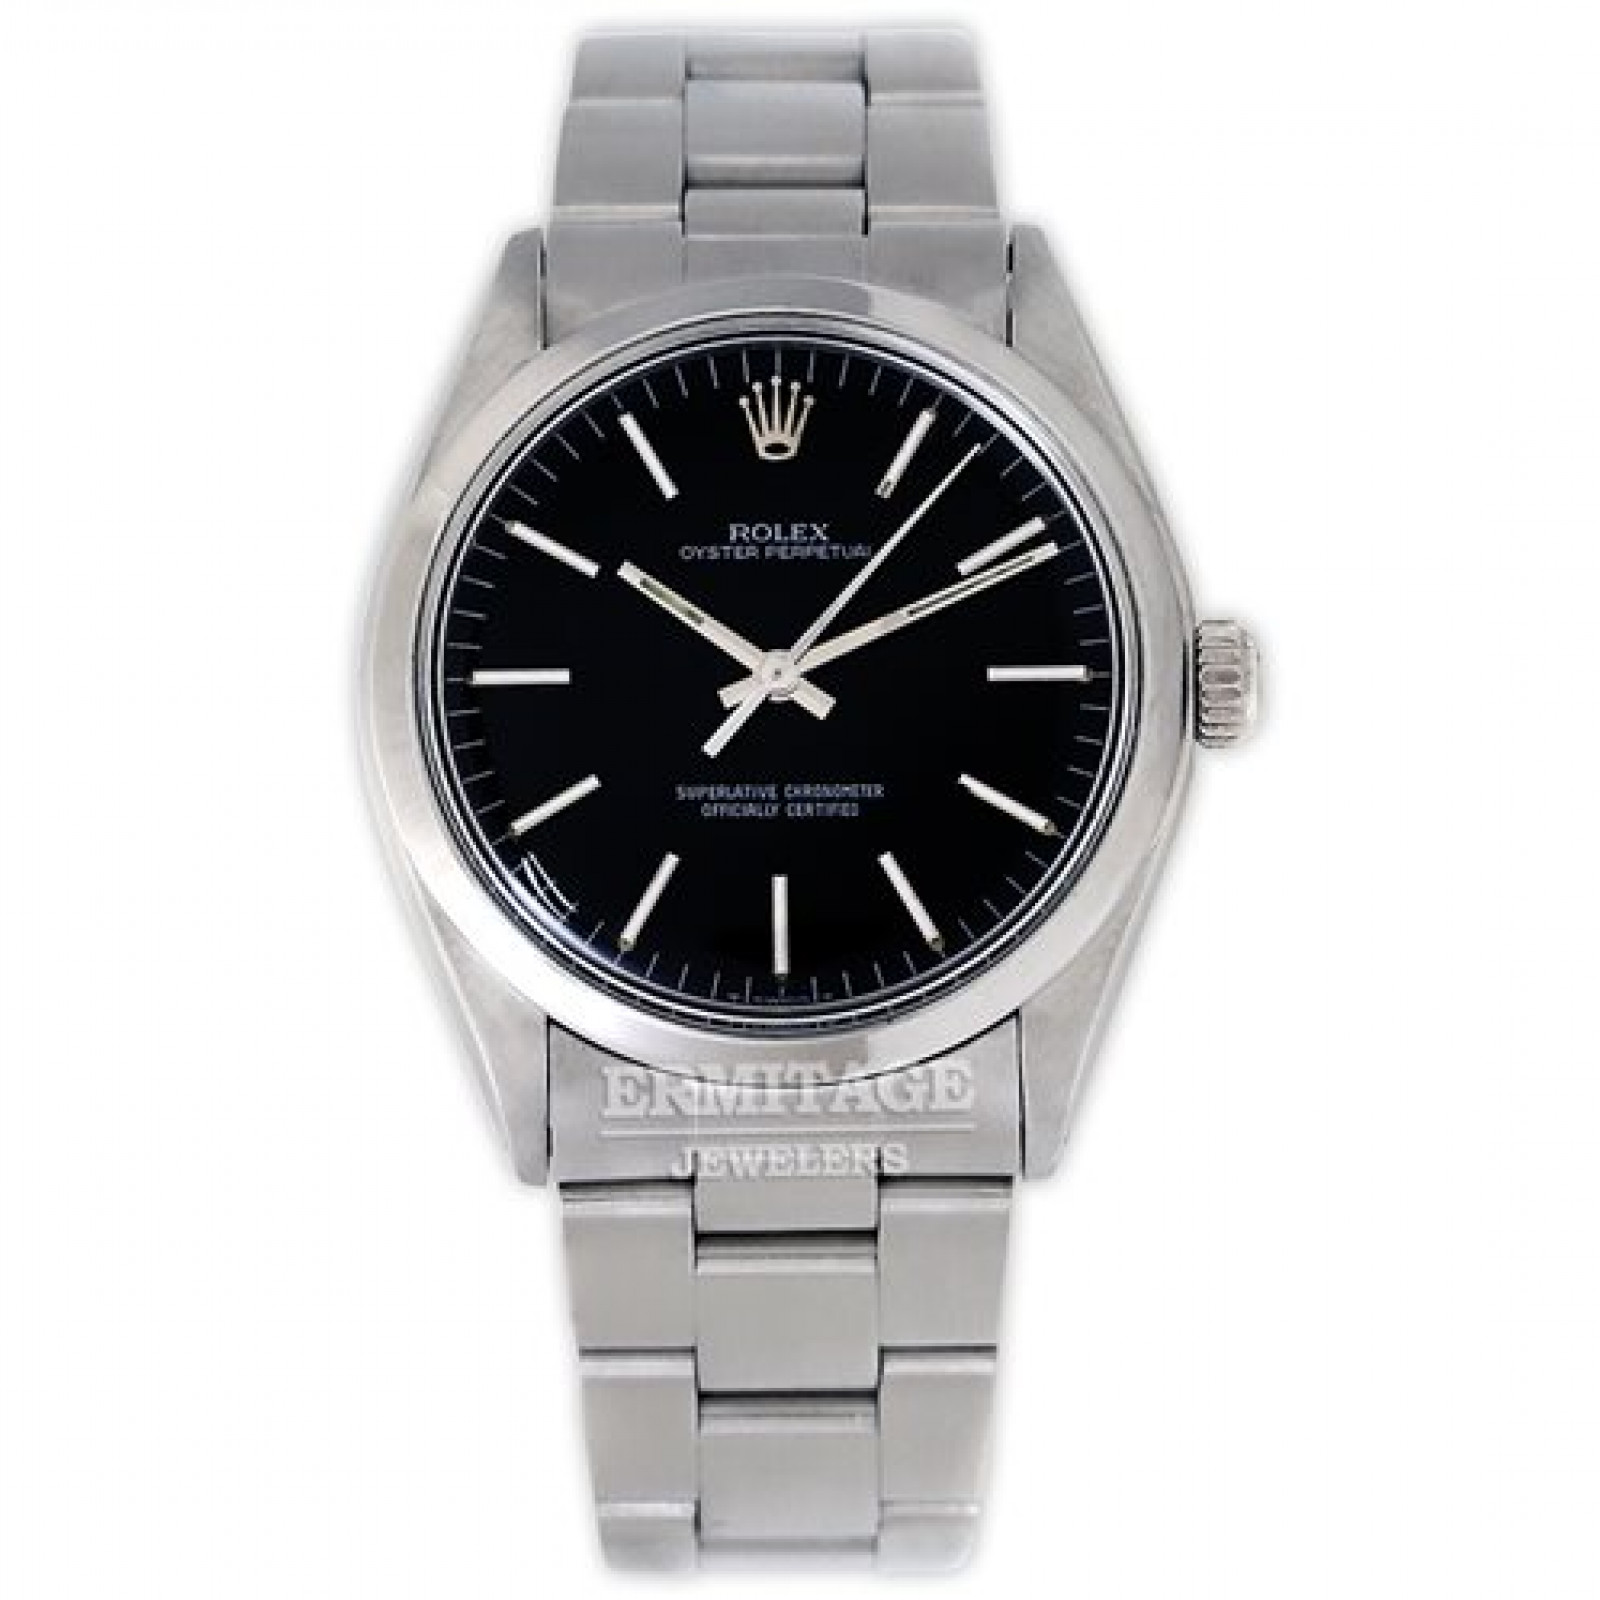 Vintage Rolex Oyster Perpetual 1002 Steel with Black Dial